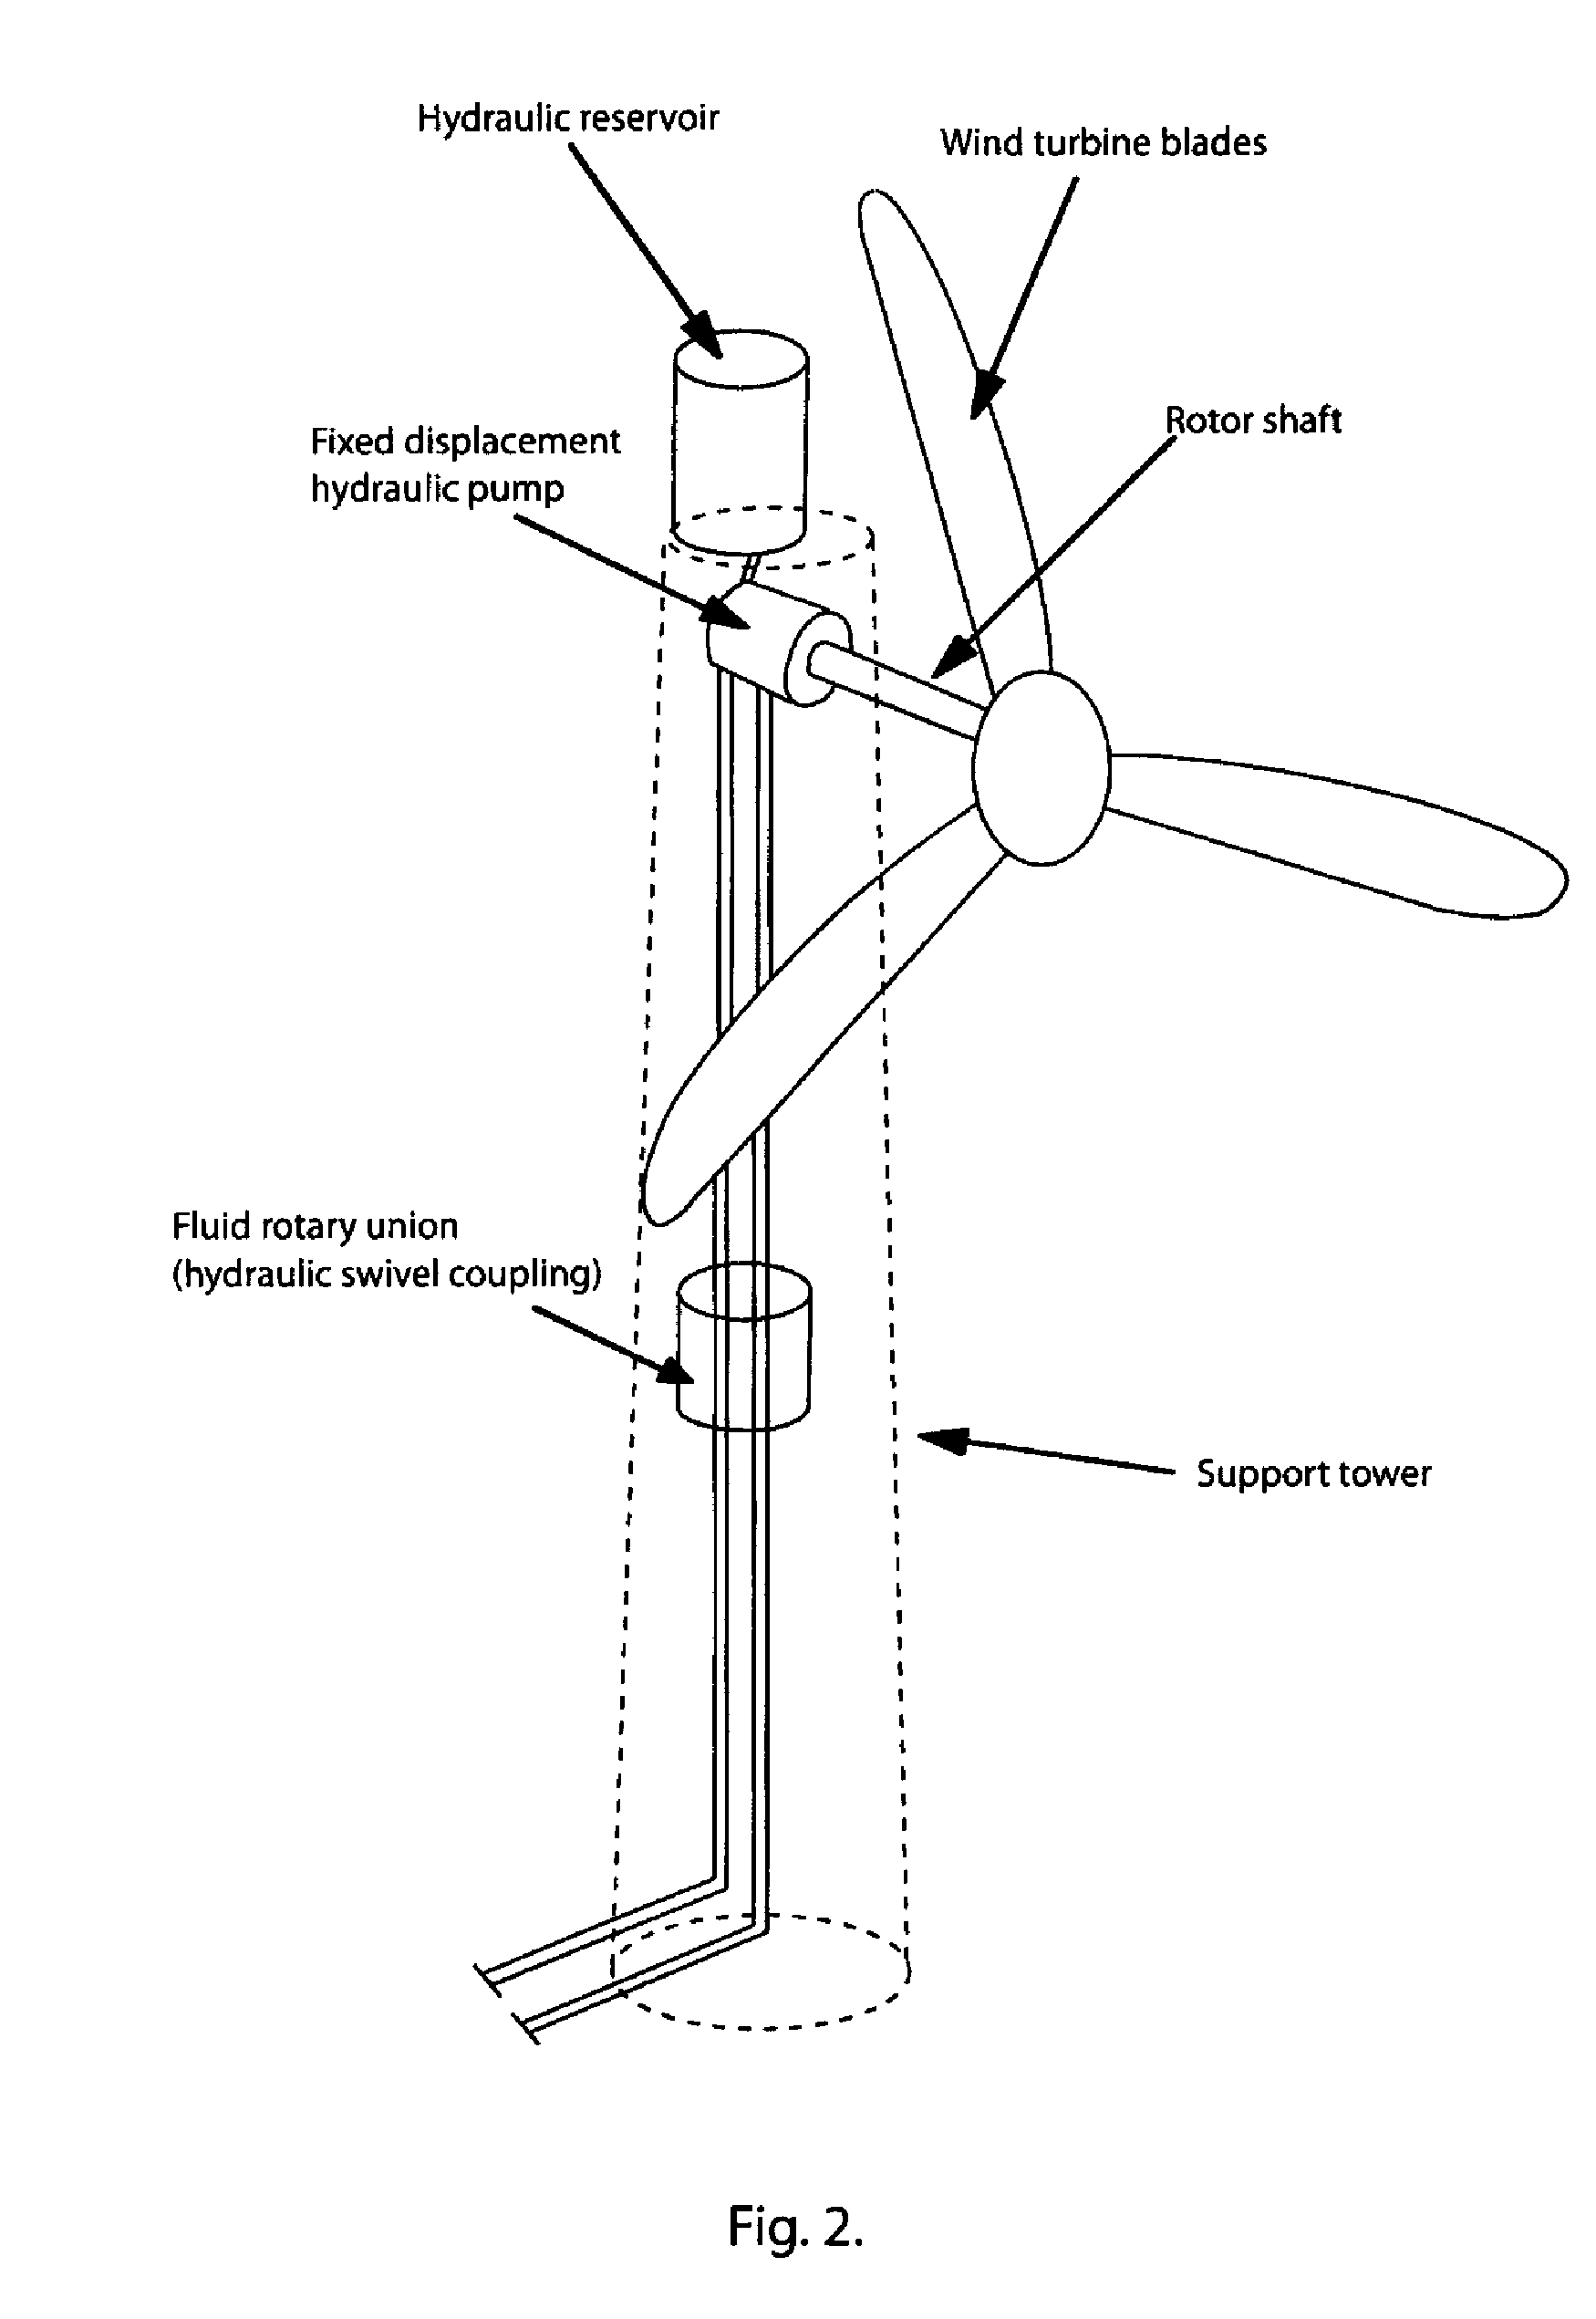 Wind To Electric Energy Conversion With Hydraulic Storage